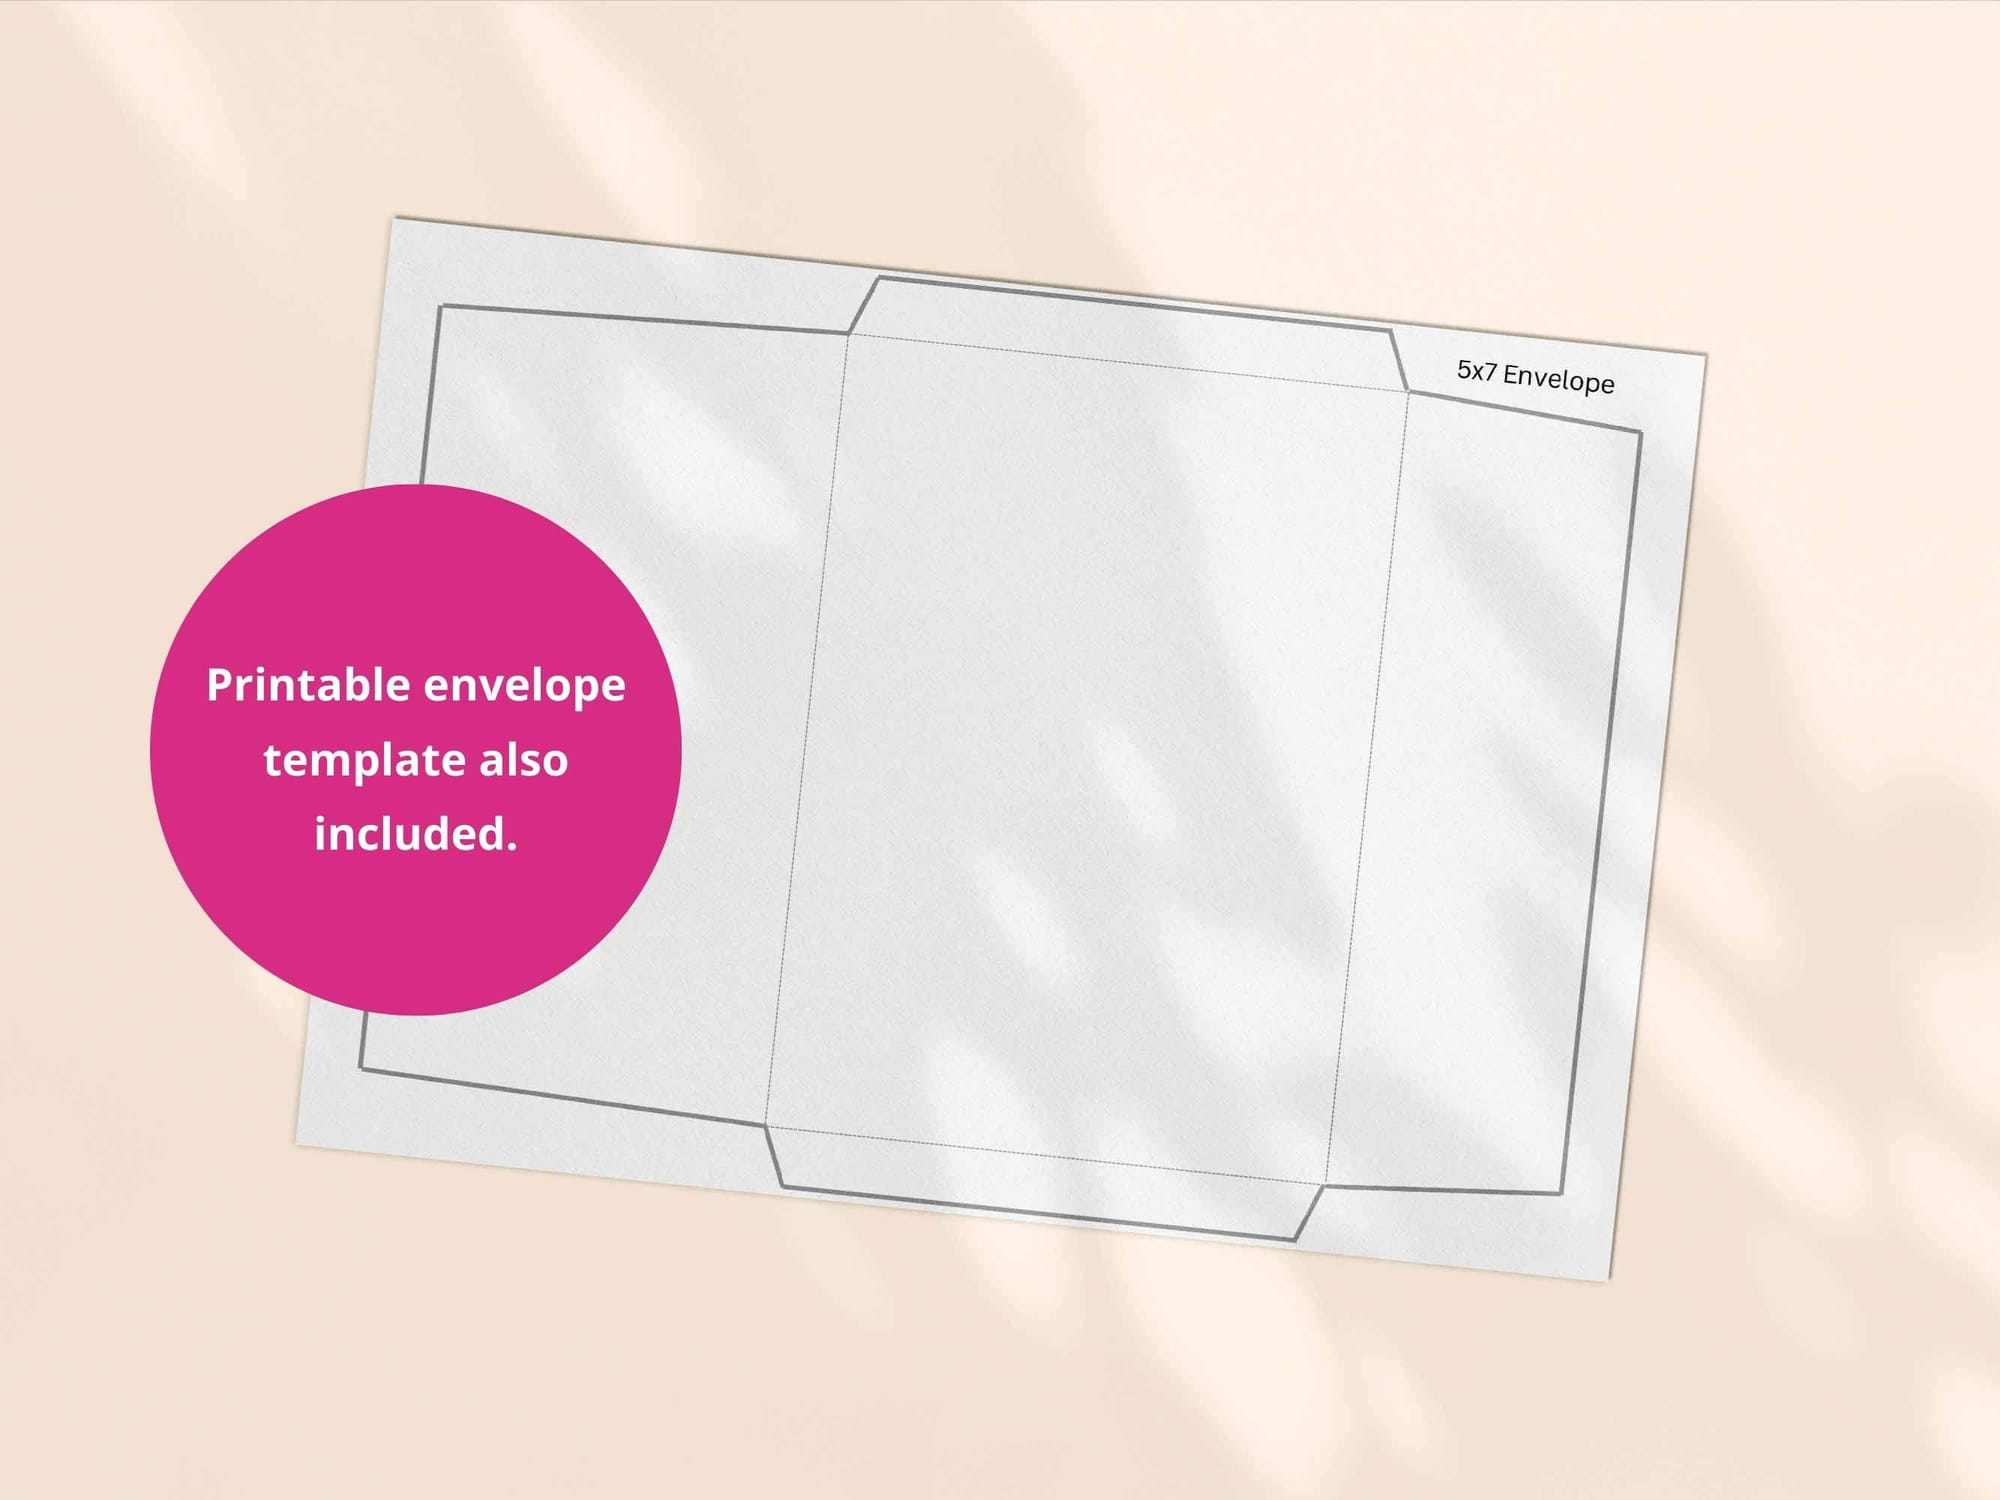 Printable envelope template - both an A4 and US Letter envelope template are included in this download.